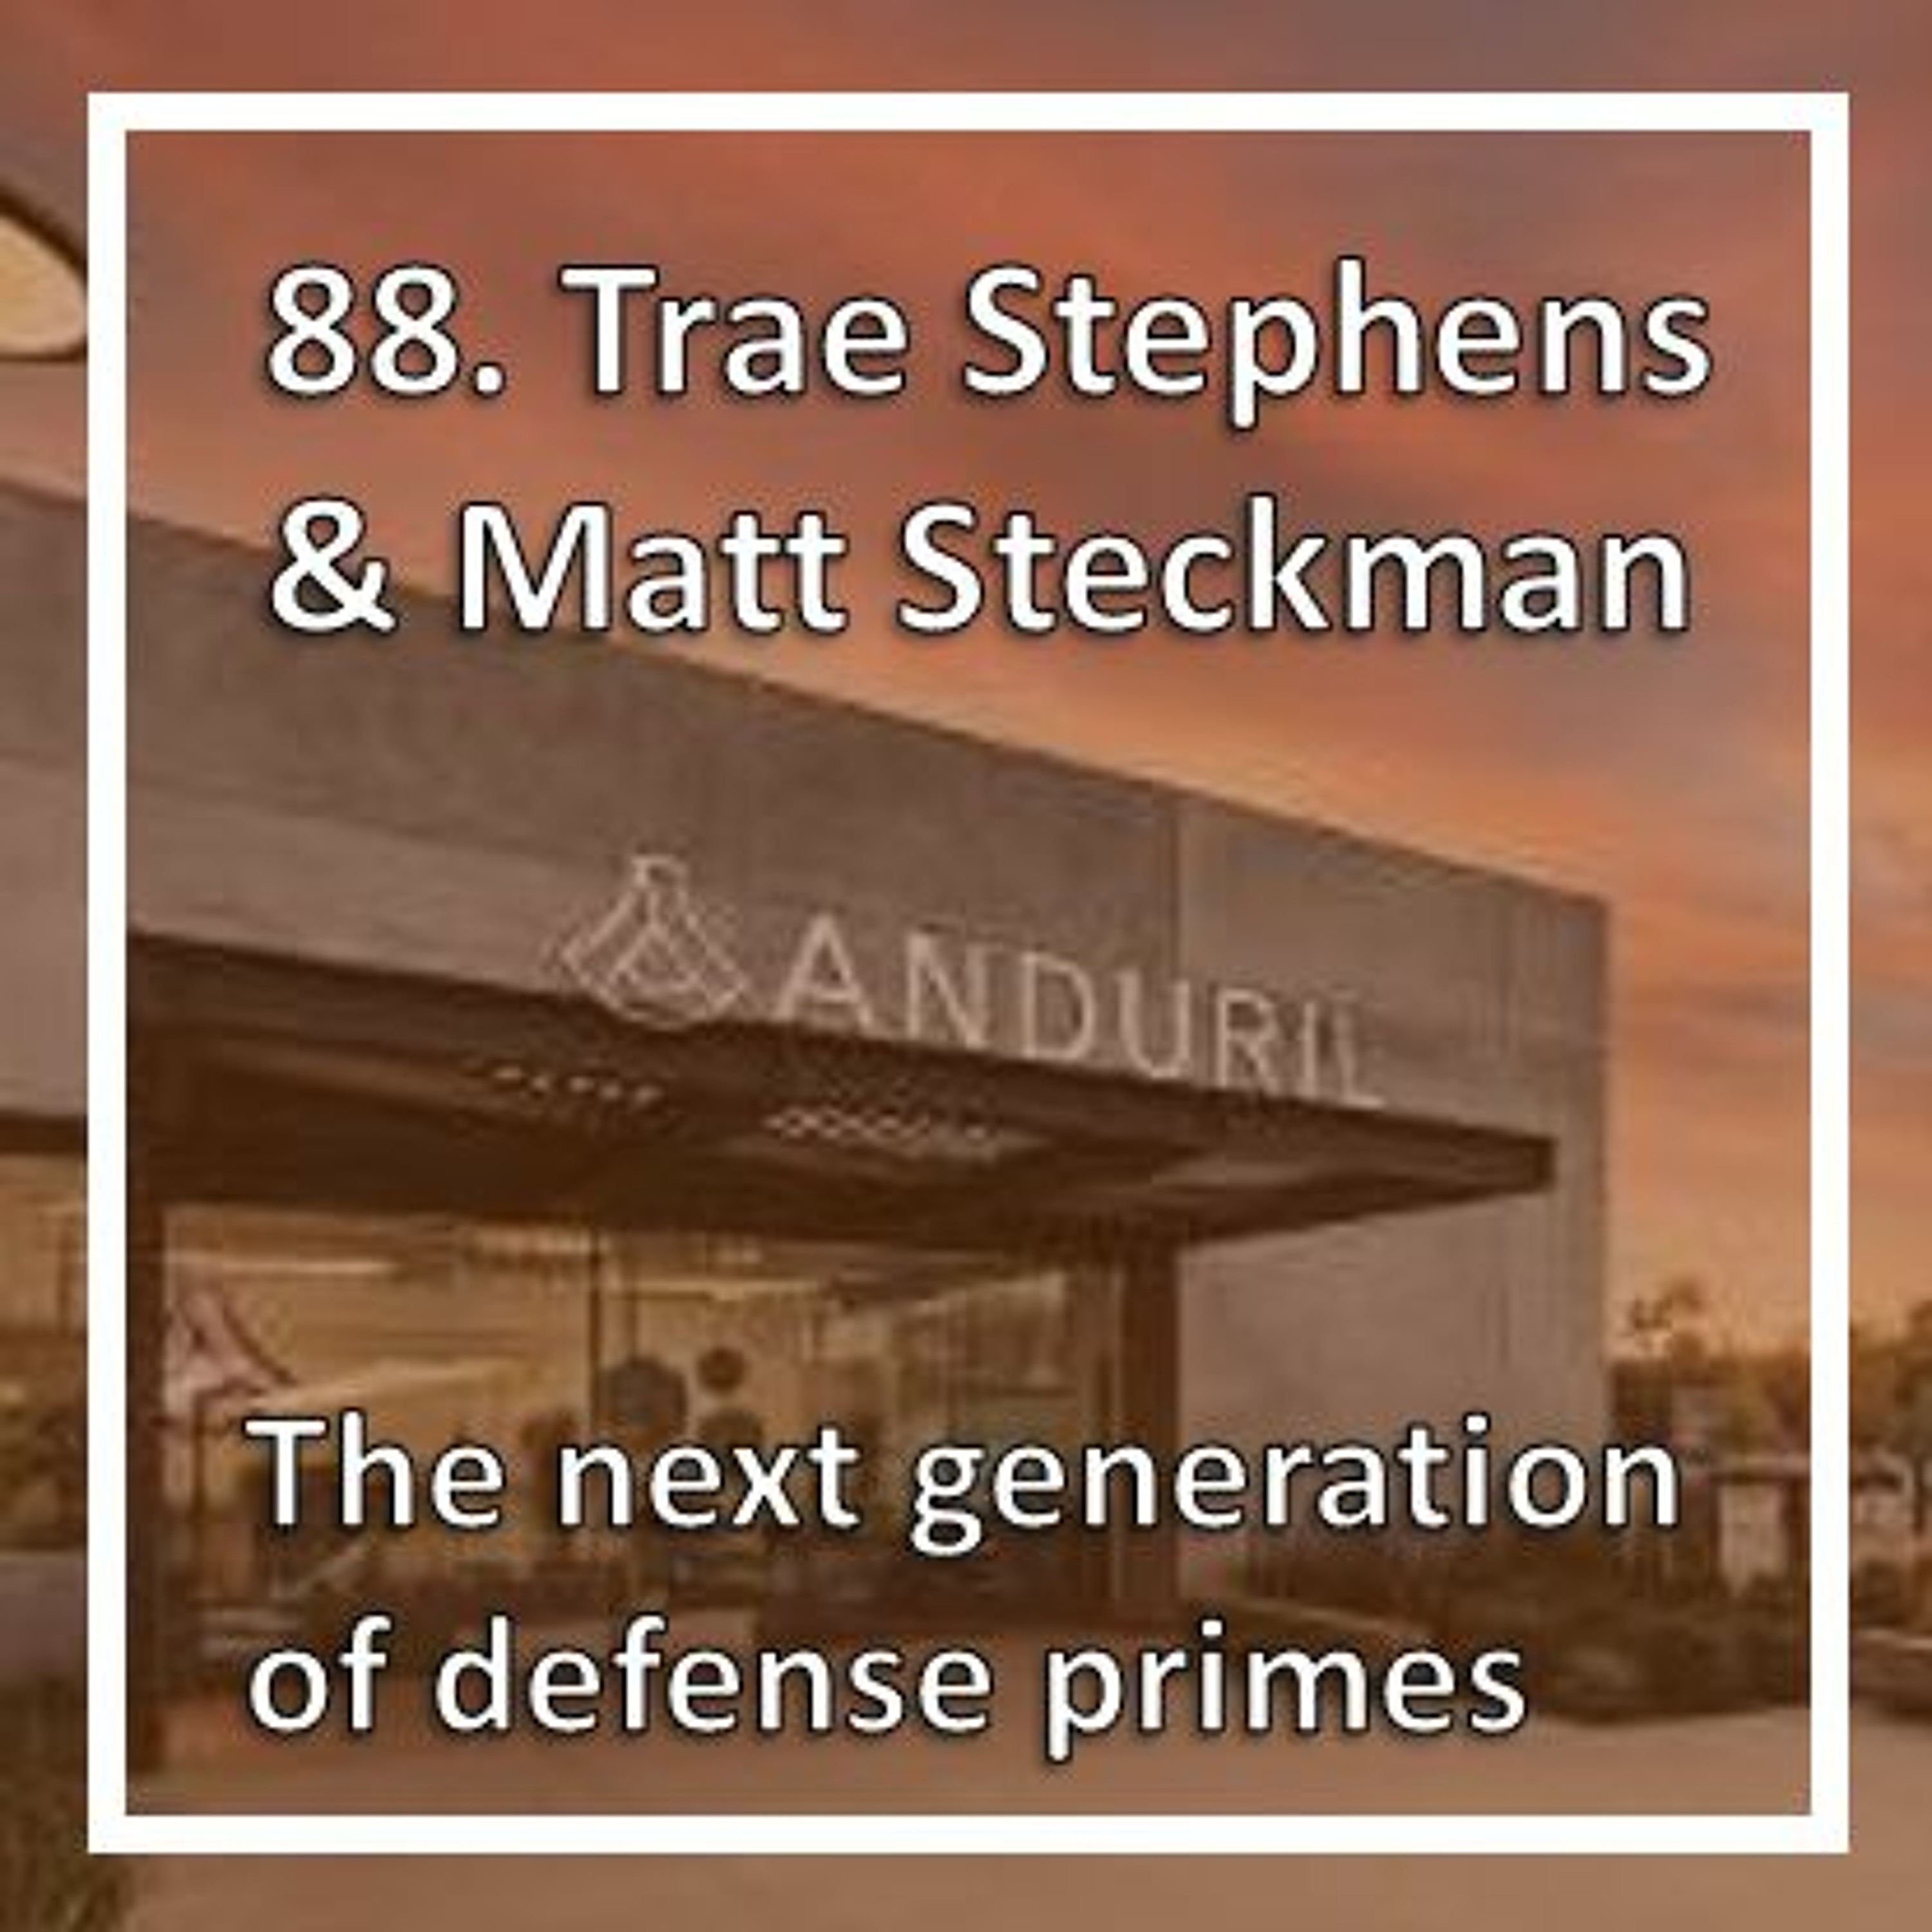 The next generation of defense primes with Matt Steckman and Trae Stephens